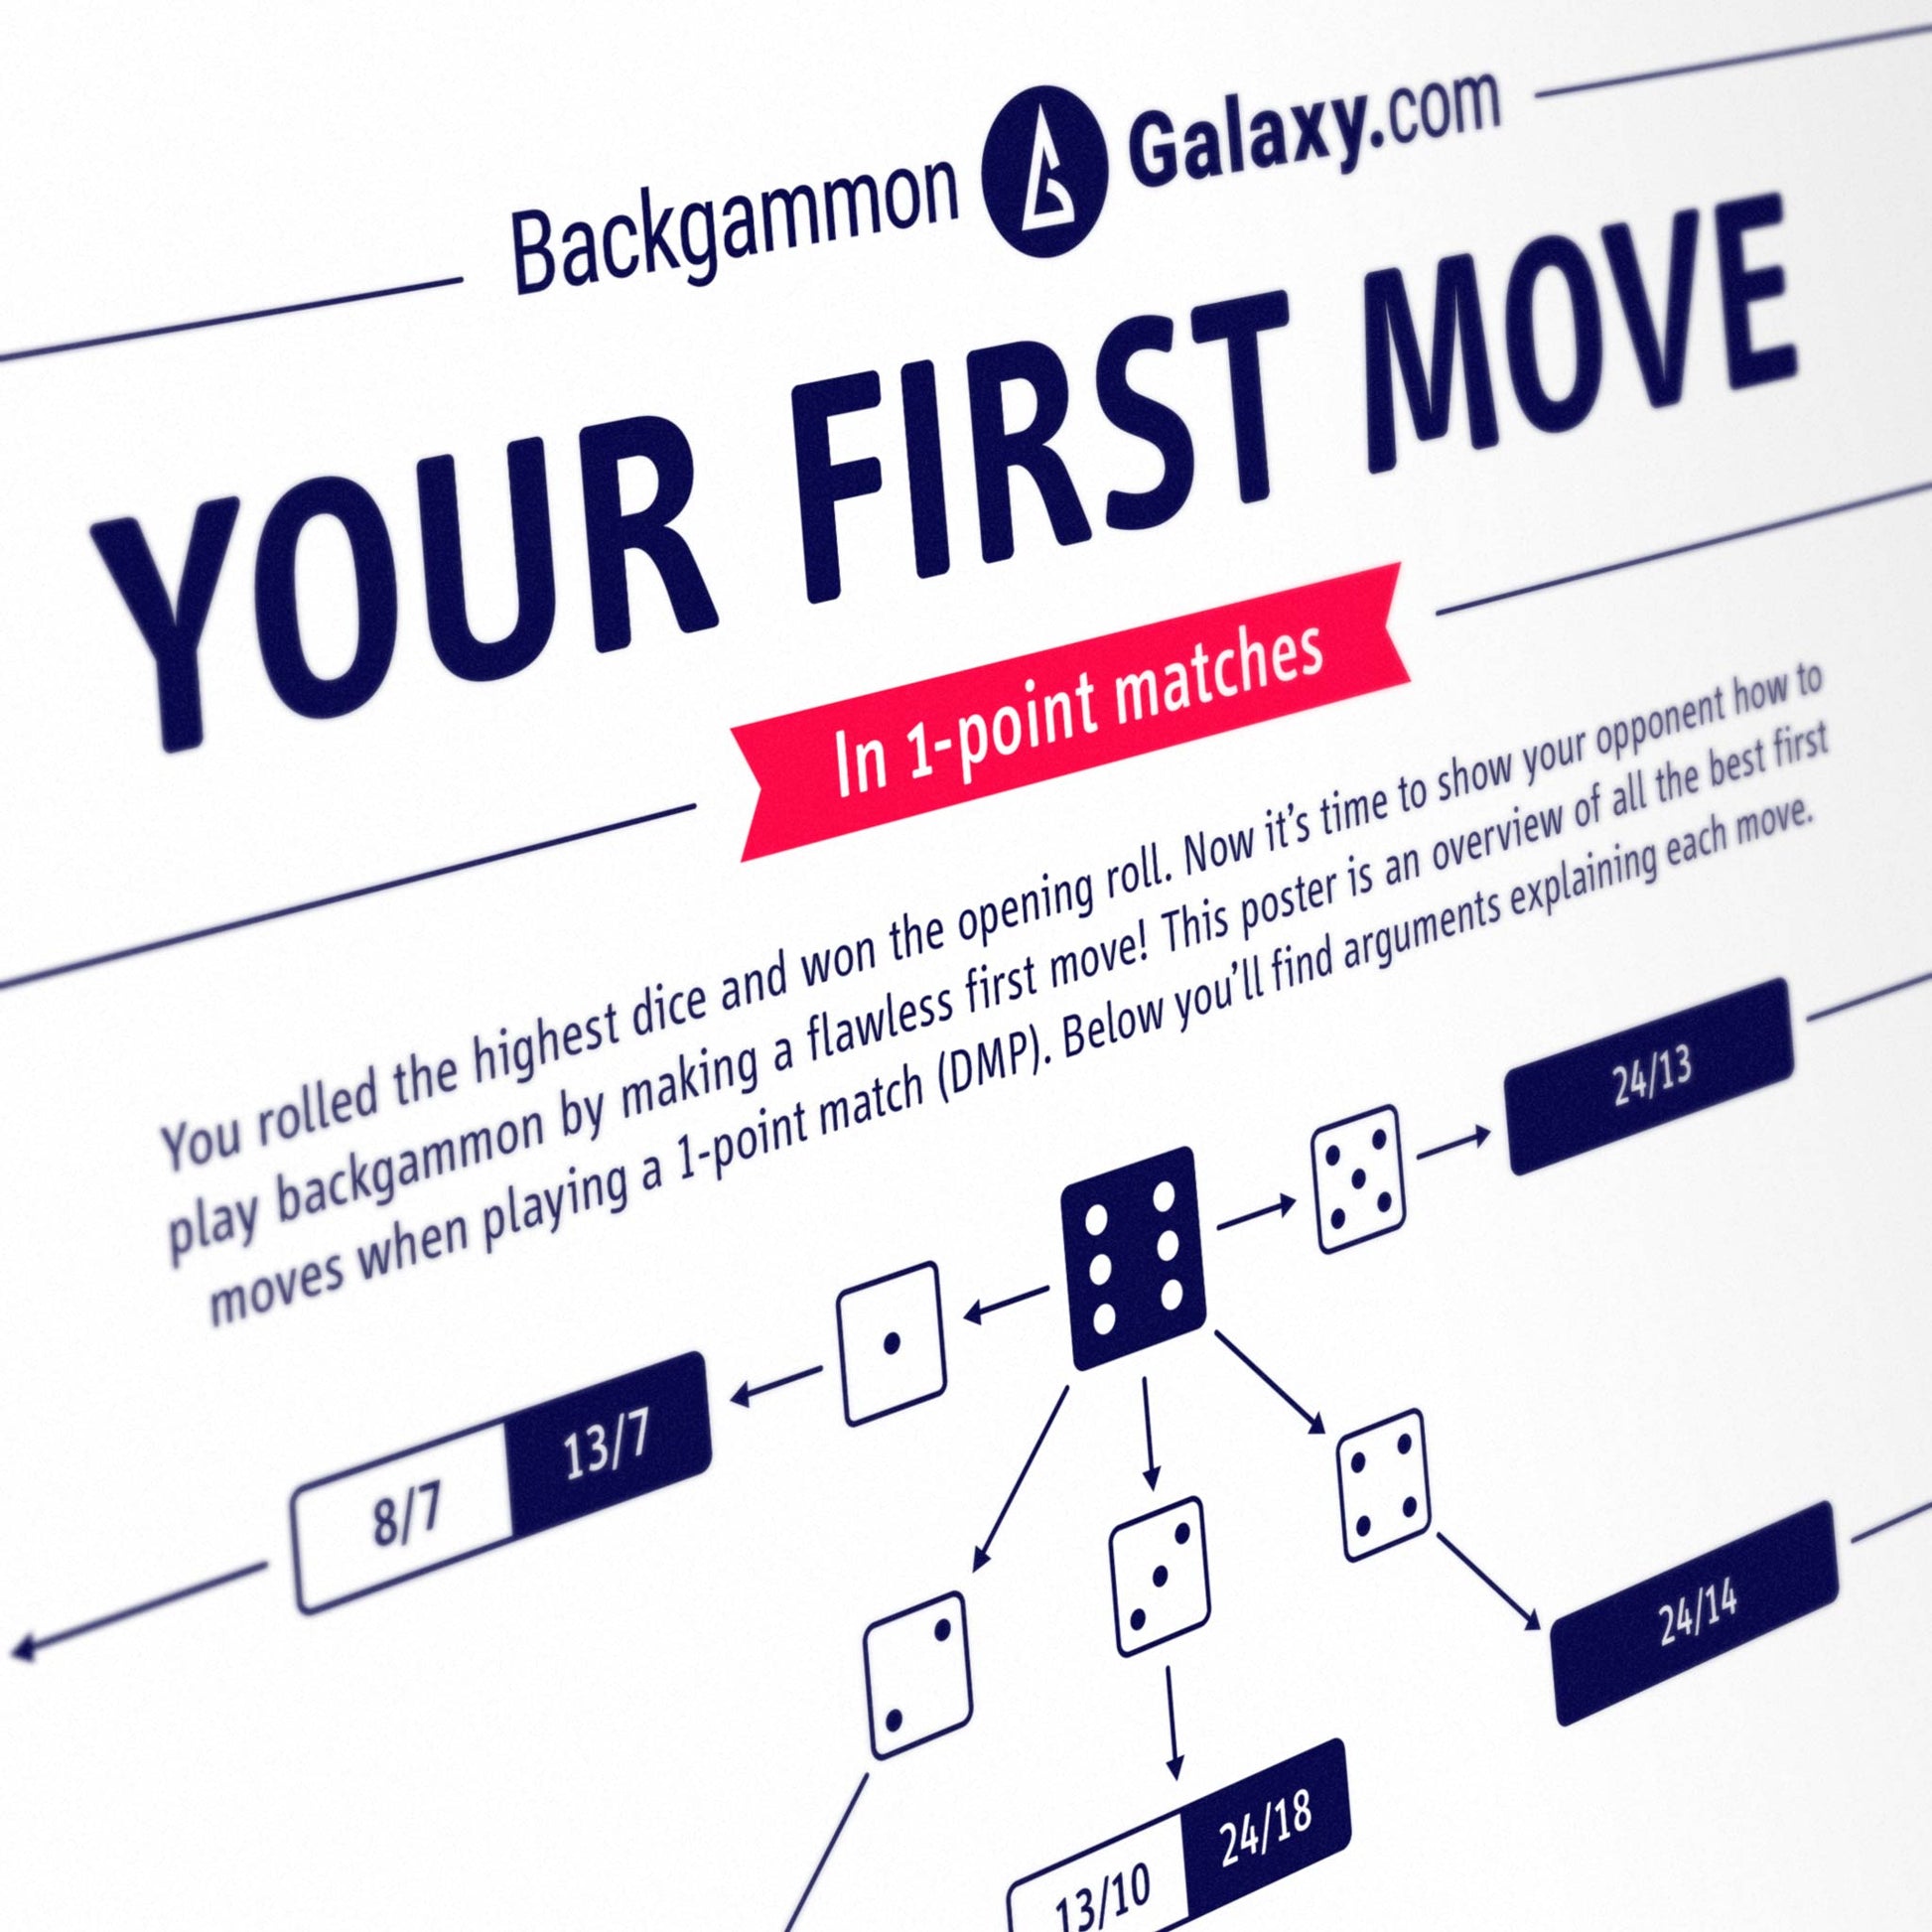 Your First Move Backgammon Poster - Backgammon Galaxy Poster